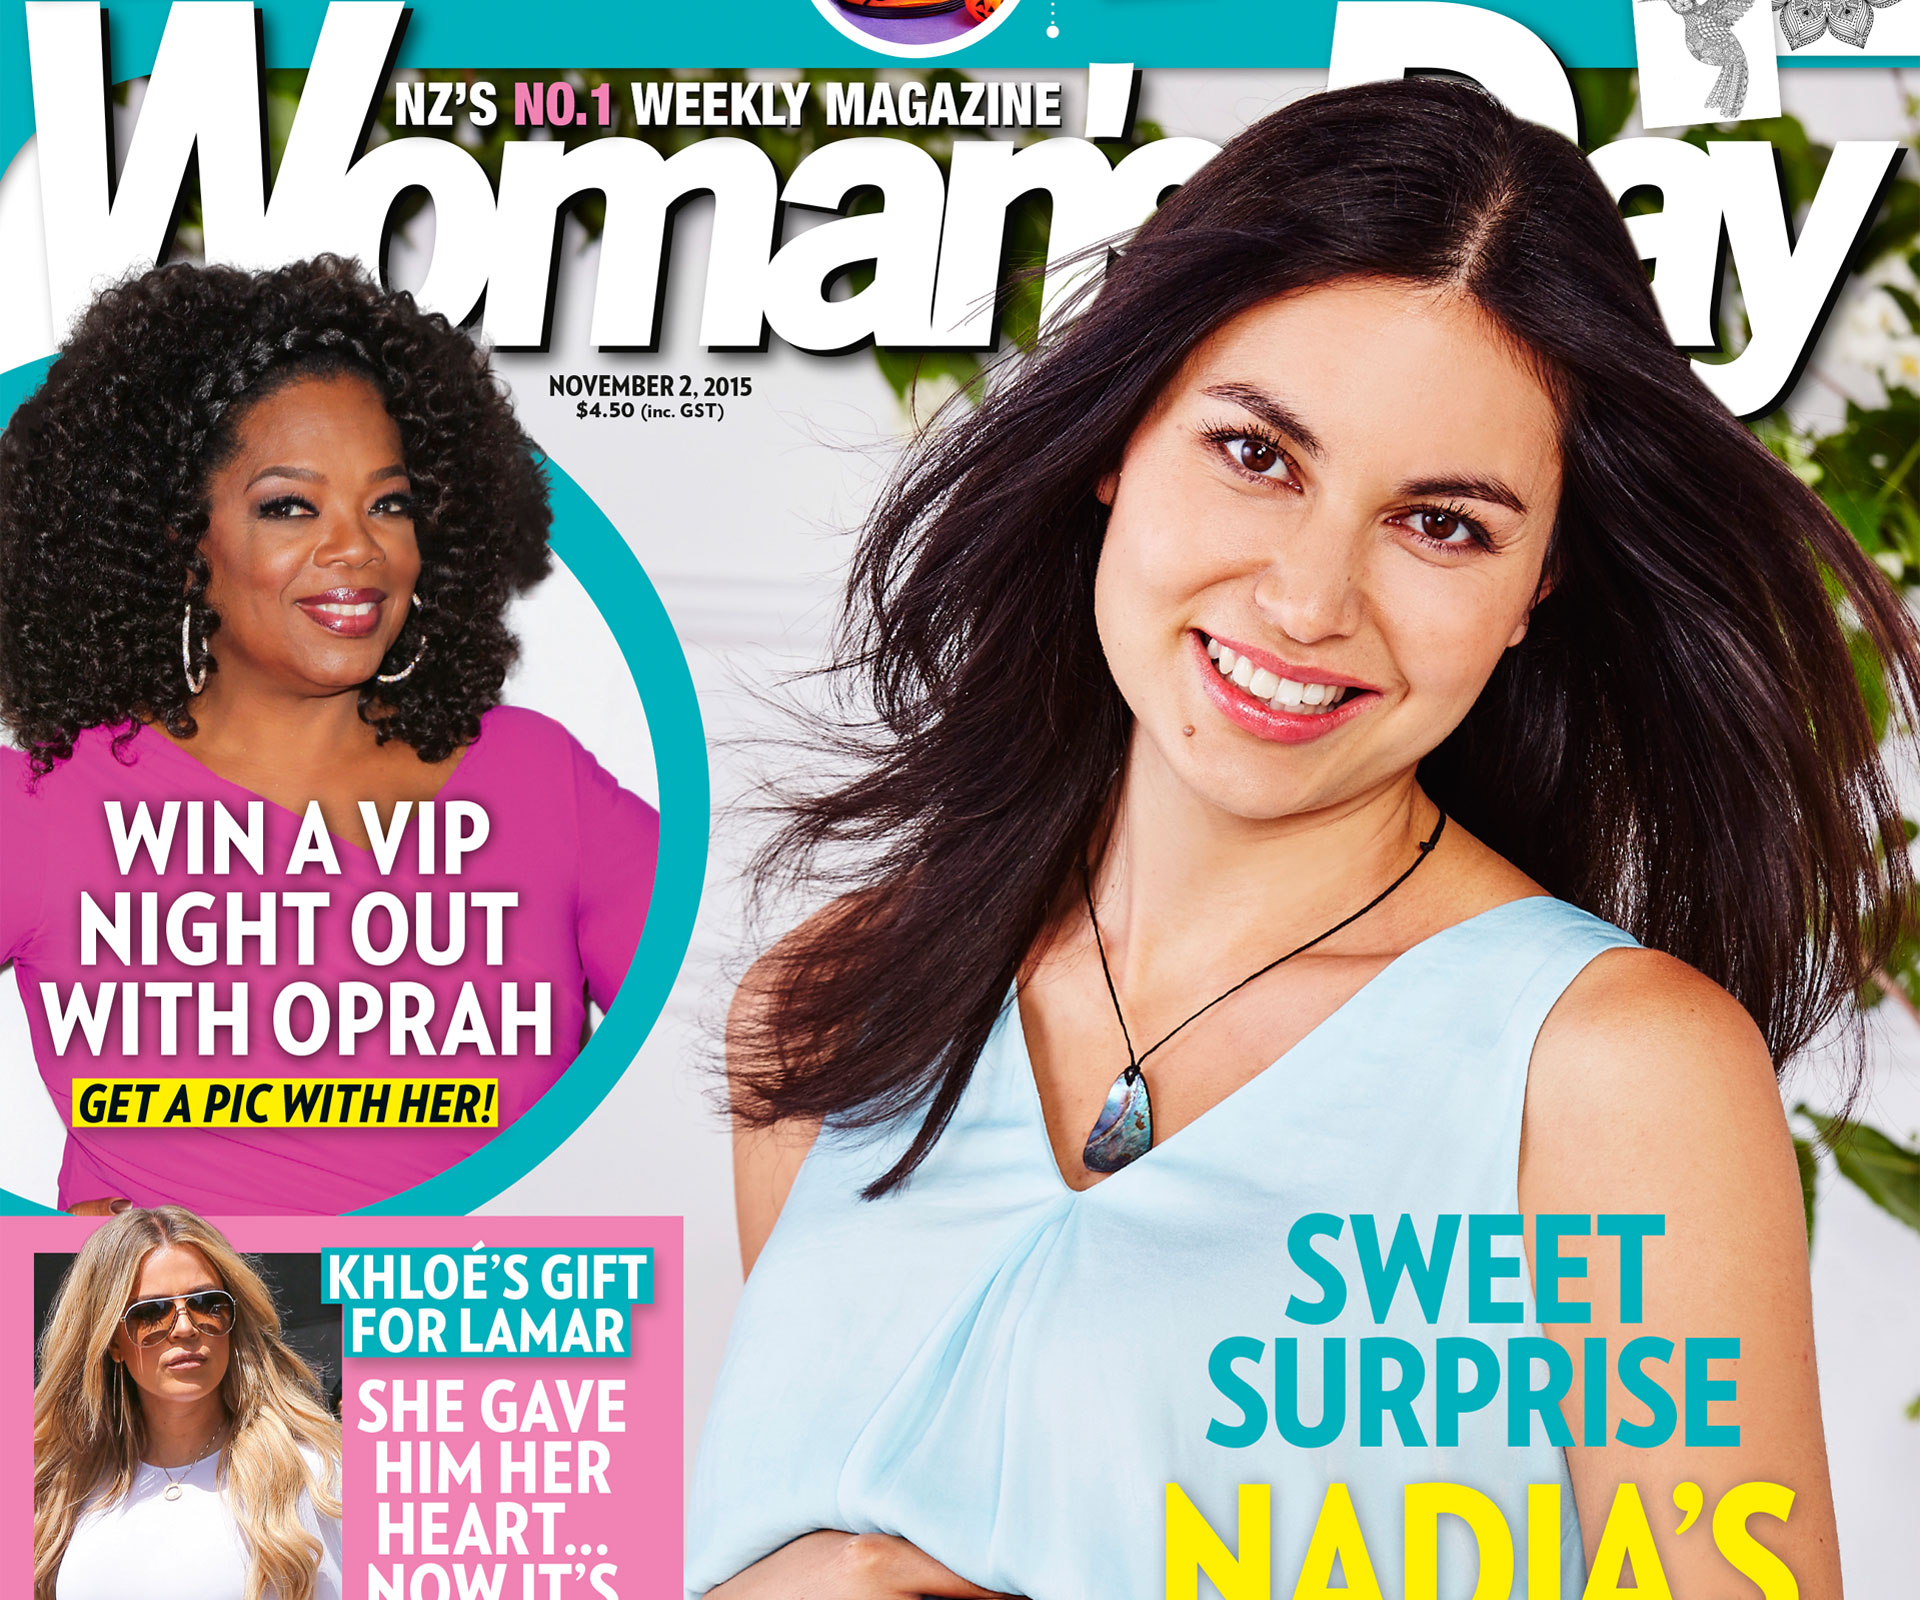 Nadia Lim on Woman's Day cover